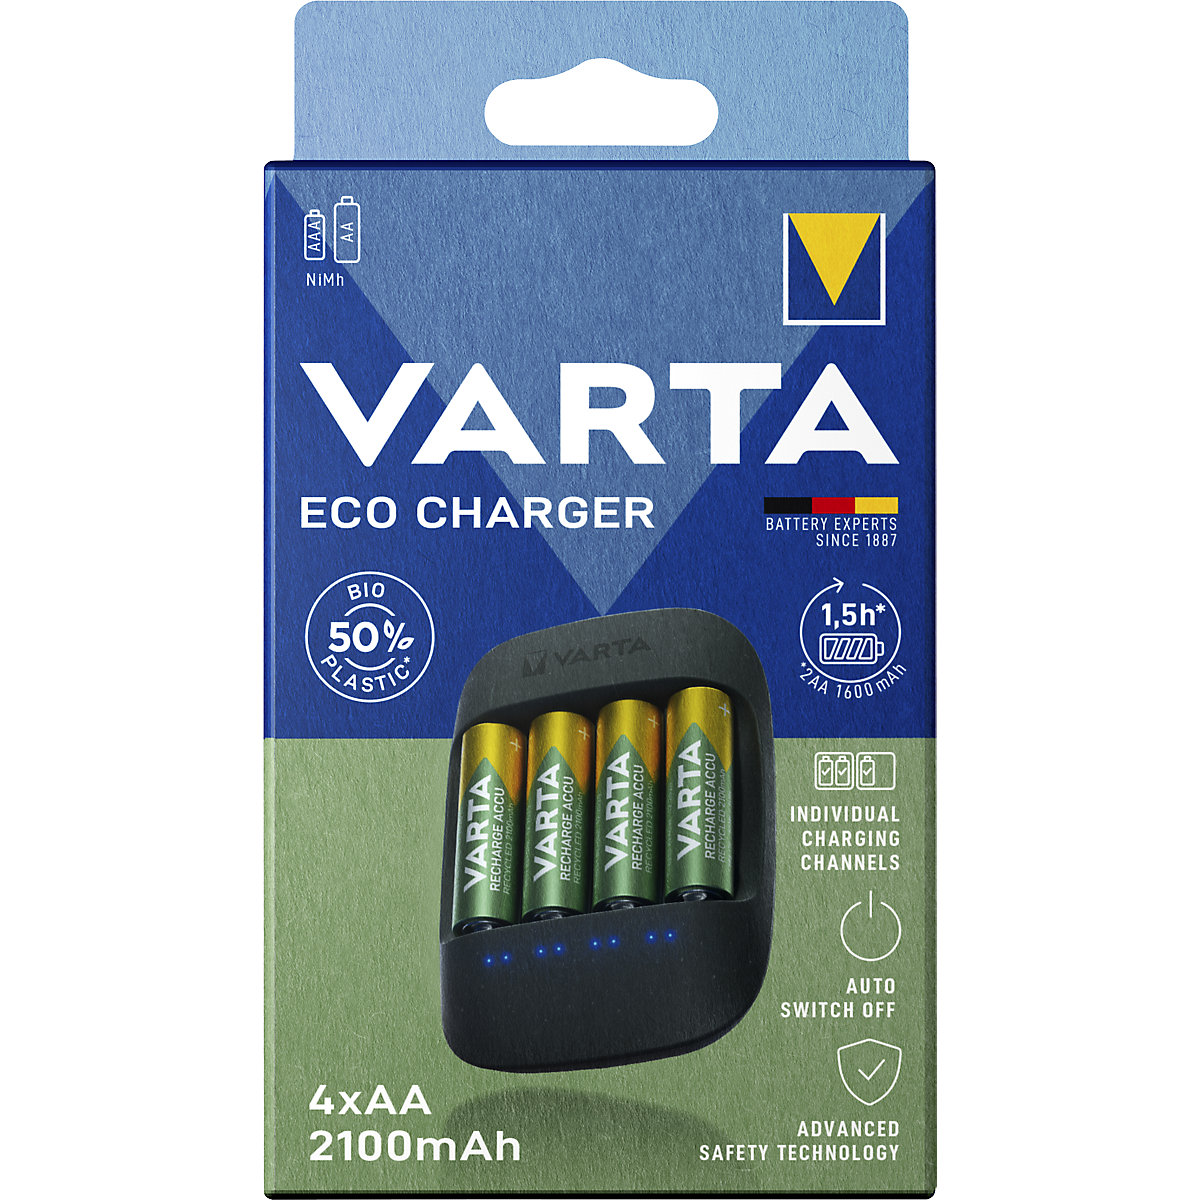 Chargeur ECO CHARGER - VARTA